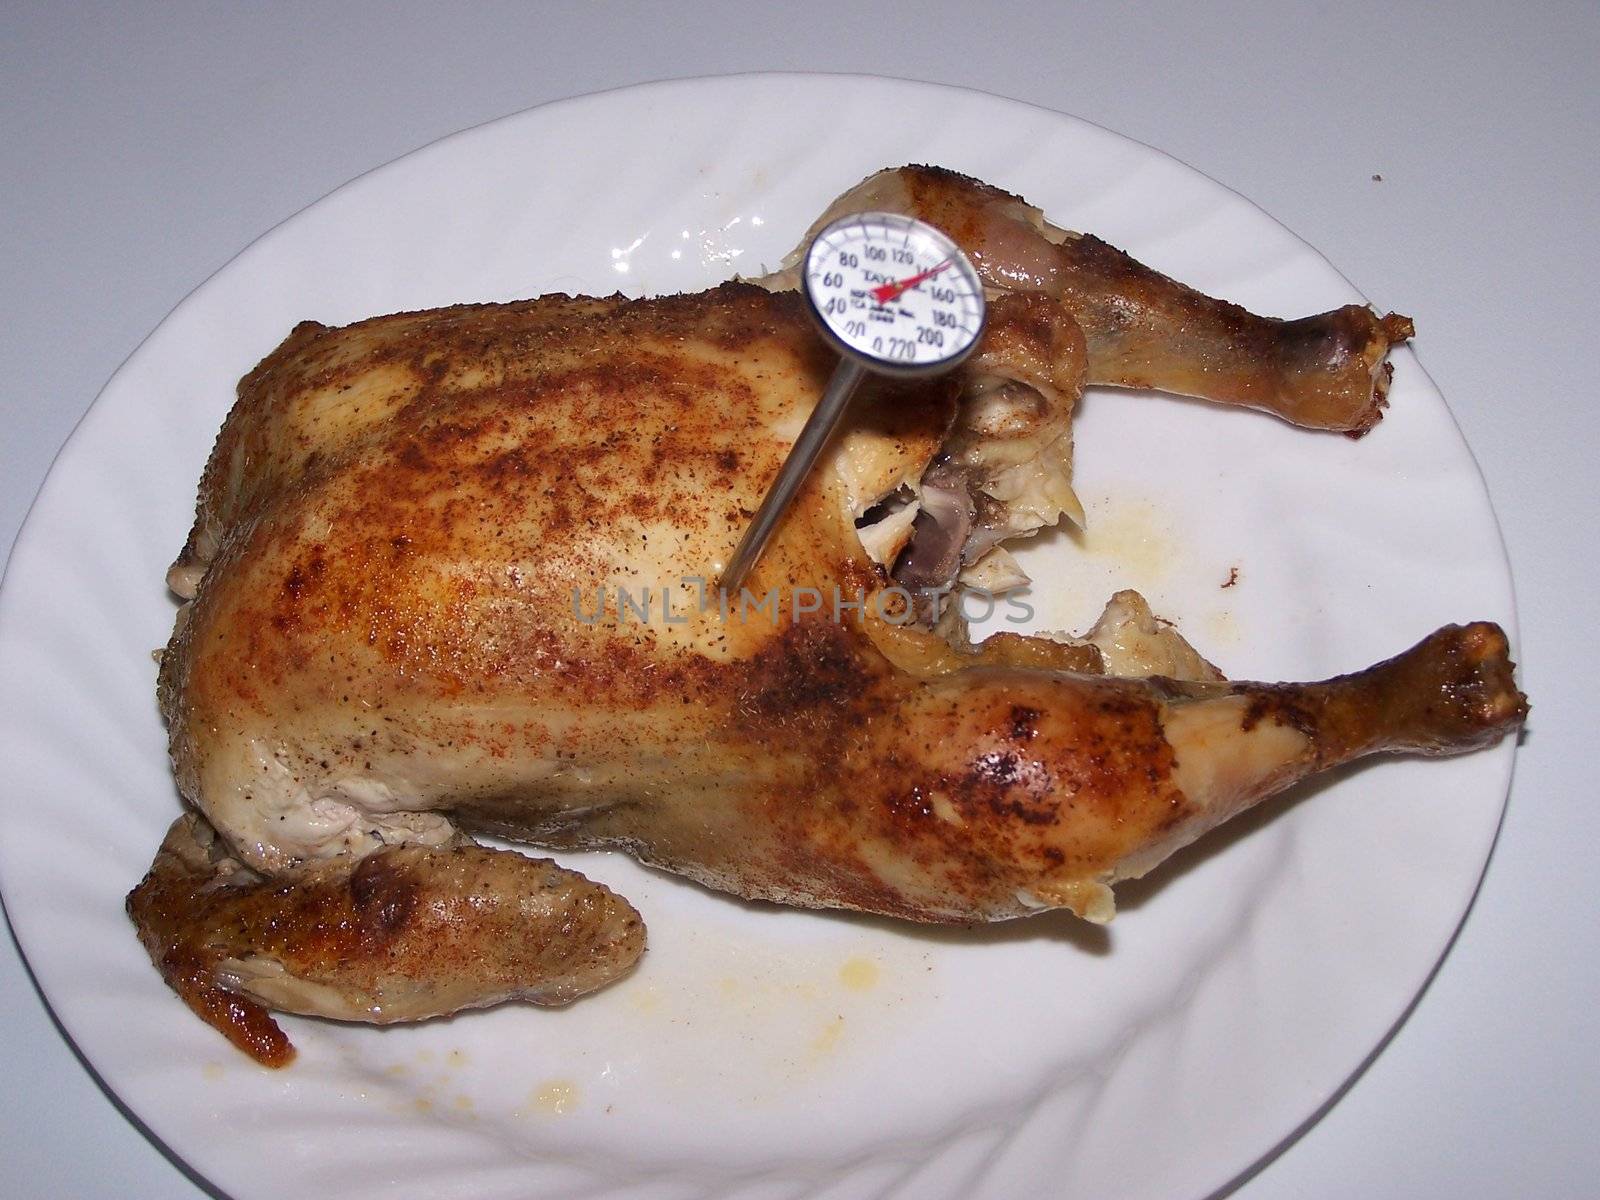 thermometer stuck in roasted chicken to see if its cooked